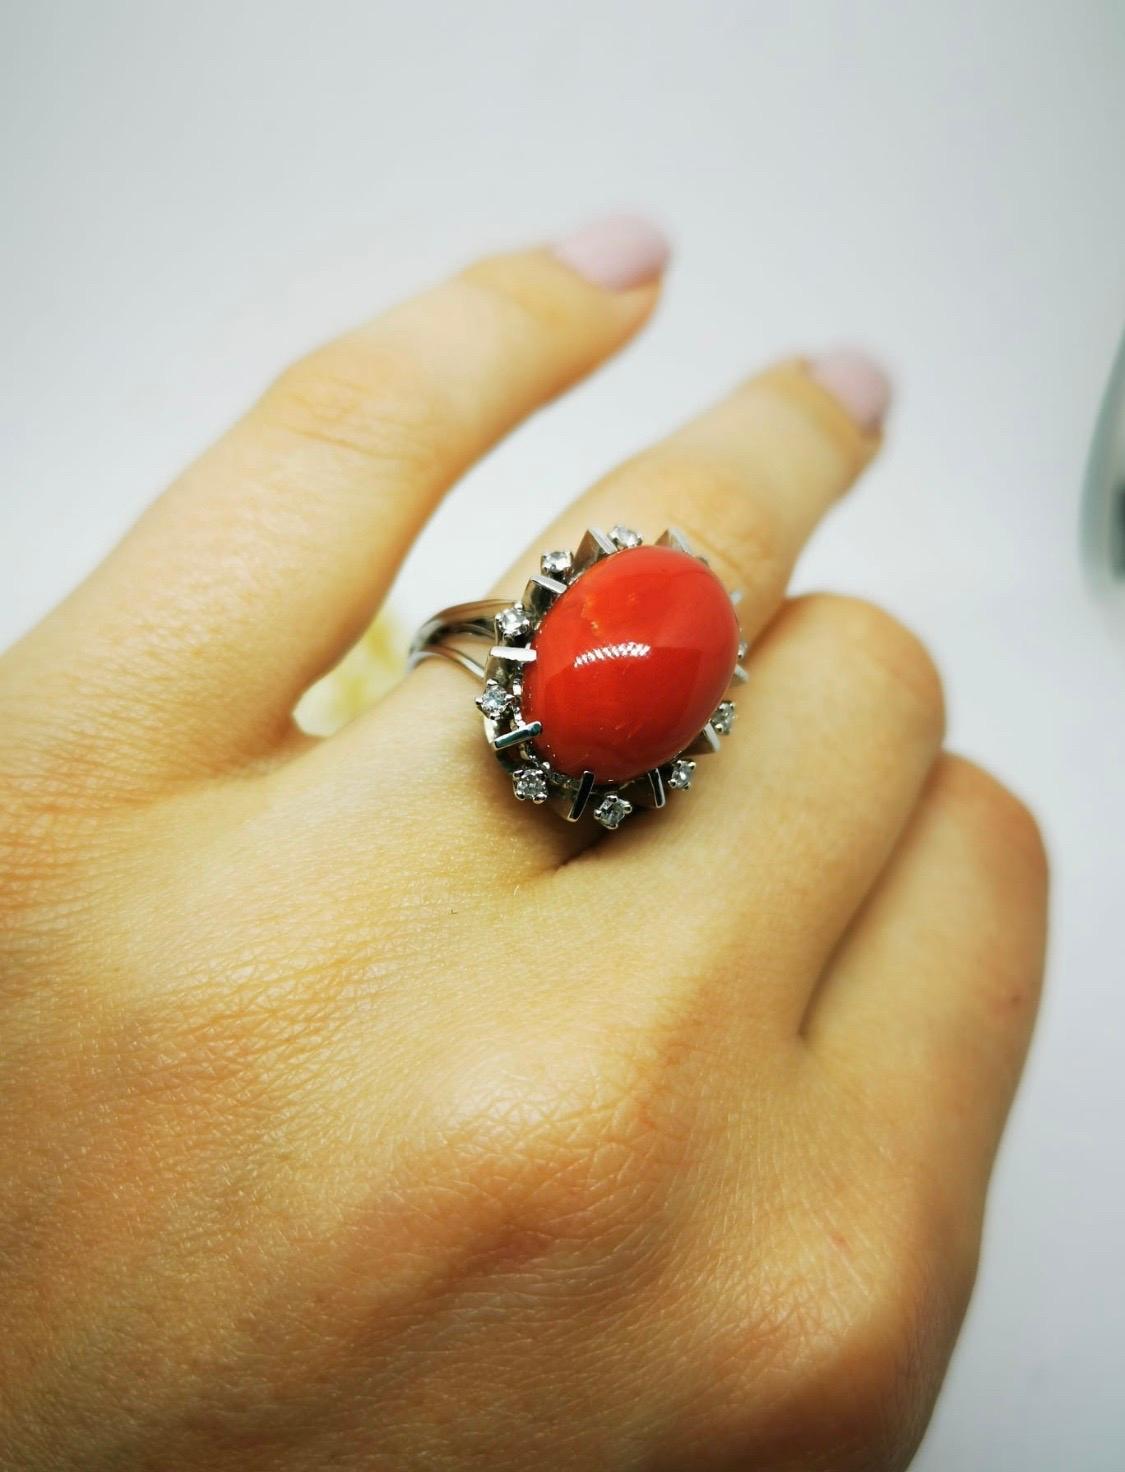 Vintage Coral and Diamonds ring

This amazing white gold ring with coral cabochon measures 18 millimeters by 13 millimeters.
The beautifully cut elongated oval coral cabochon is embellishments by a gallery of 10 diamonds set at an angle to show off